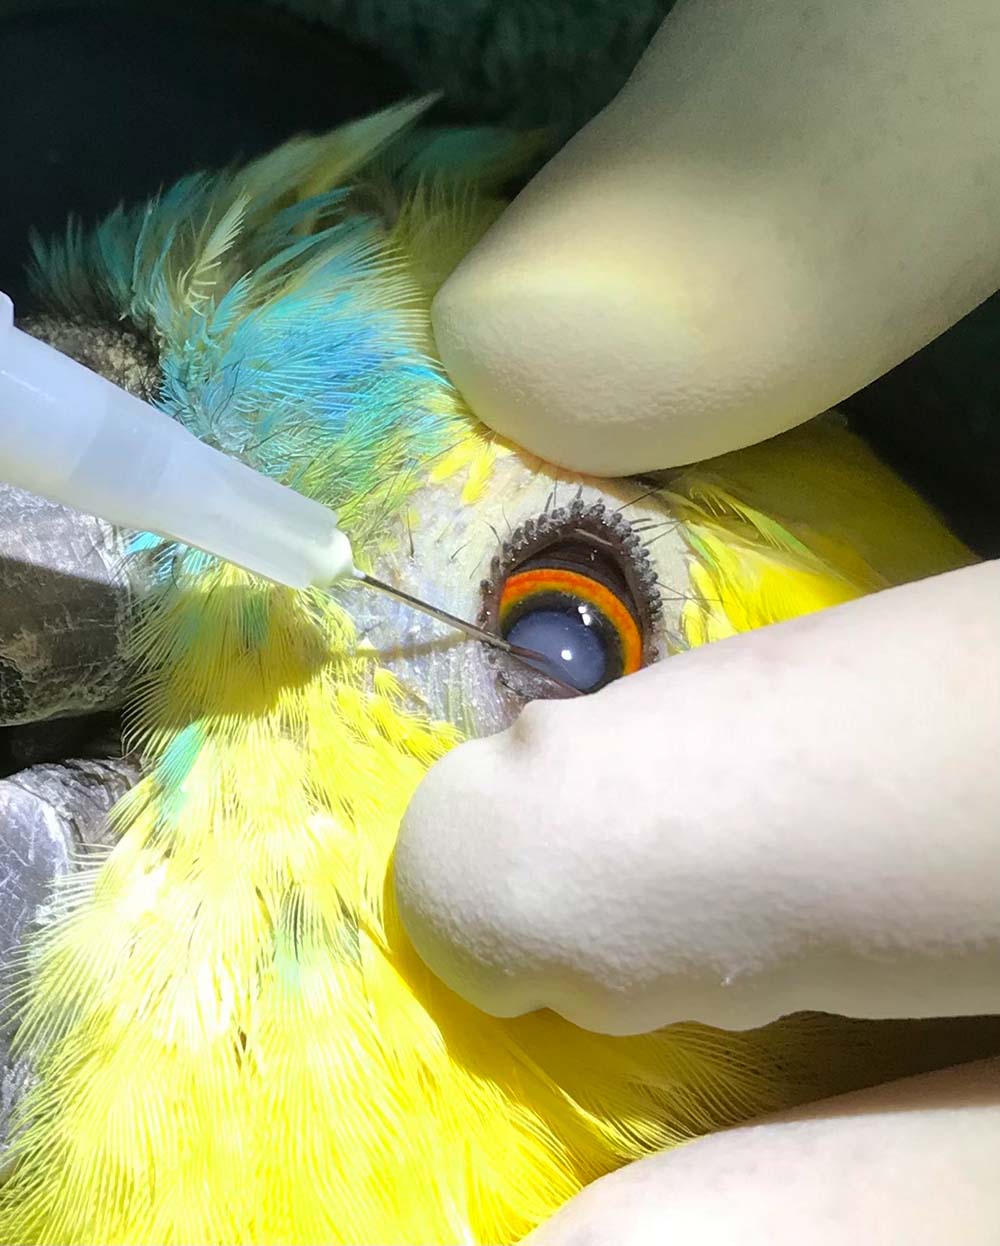 Figure 4. Incising the lens capsule and breaking down the cataract material using the hypodermic needle “fish hook”.